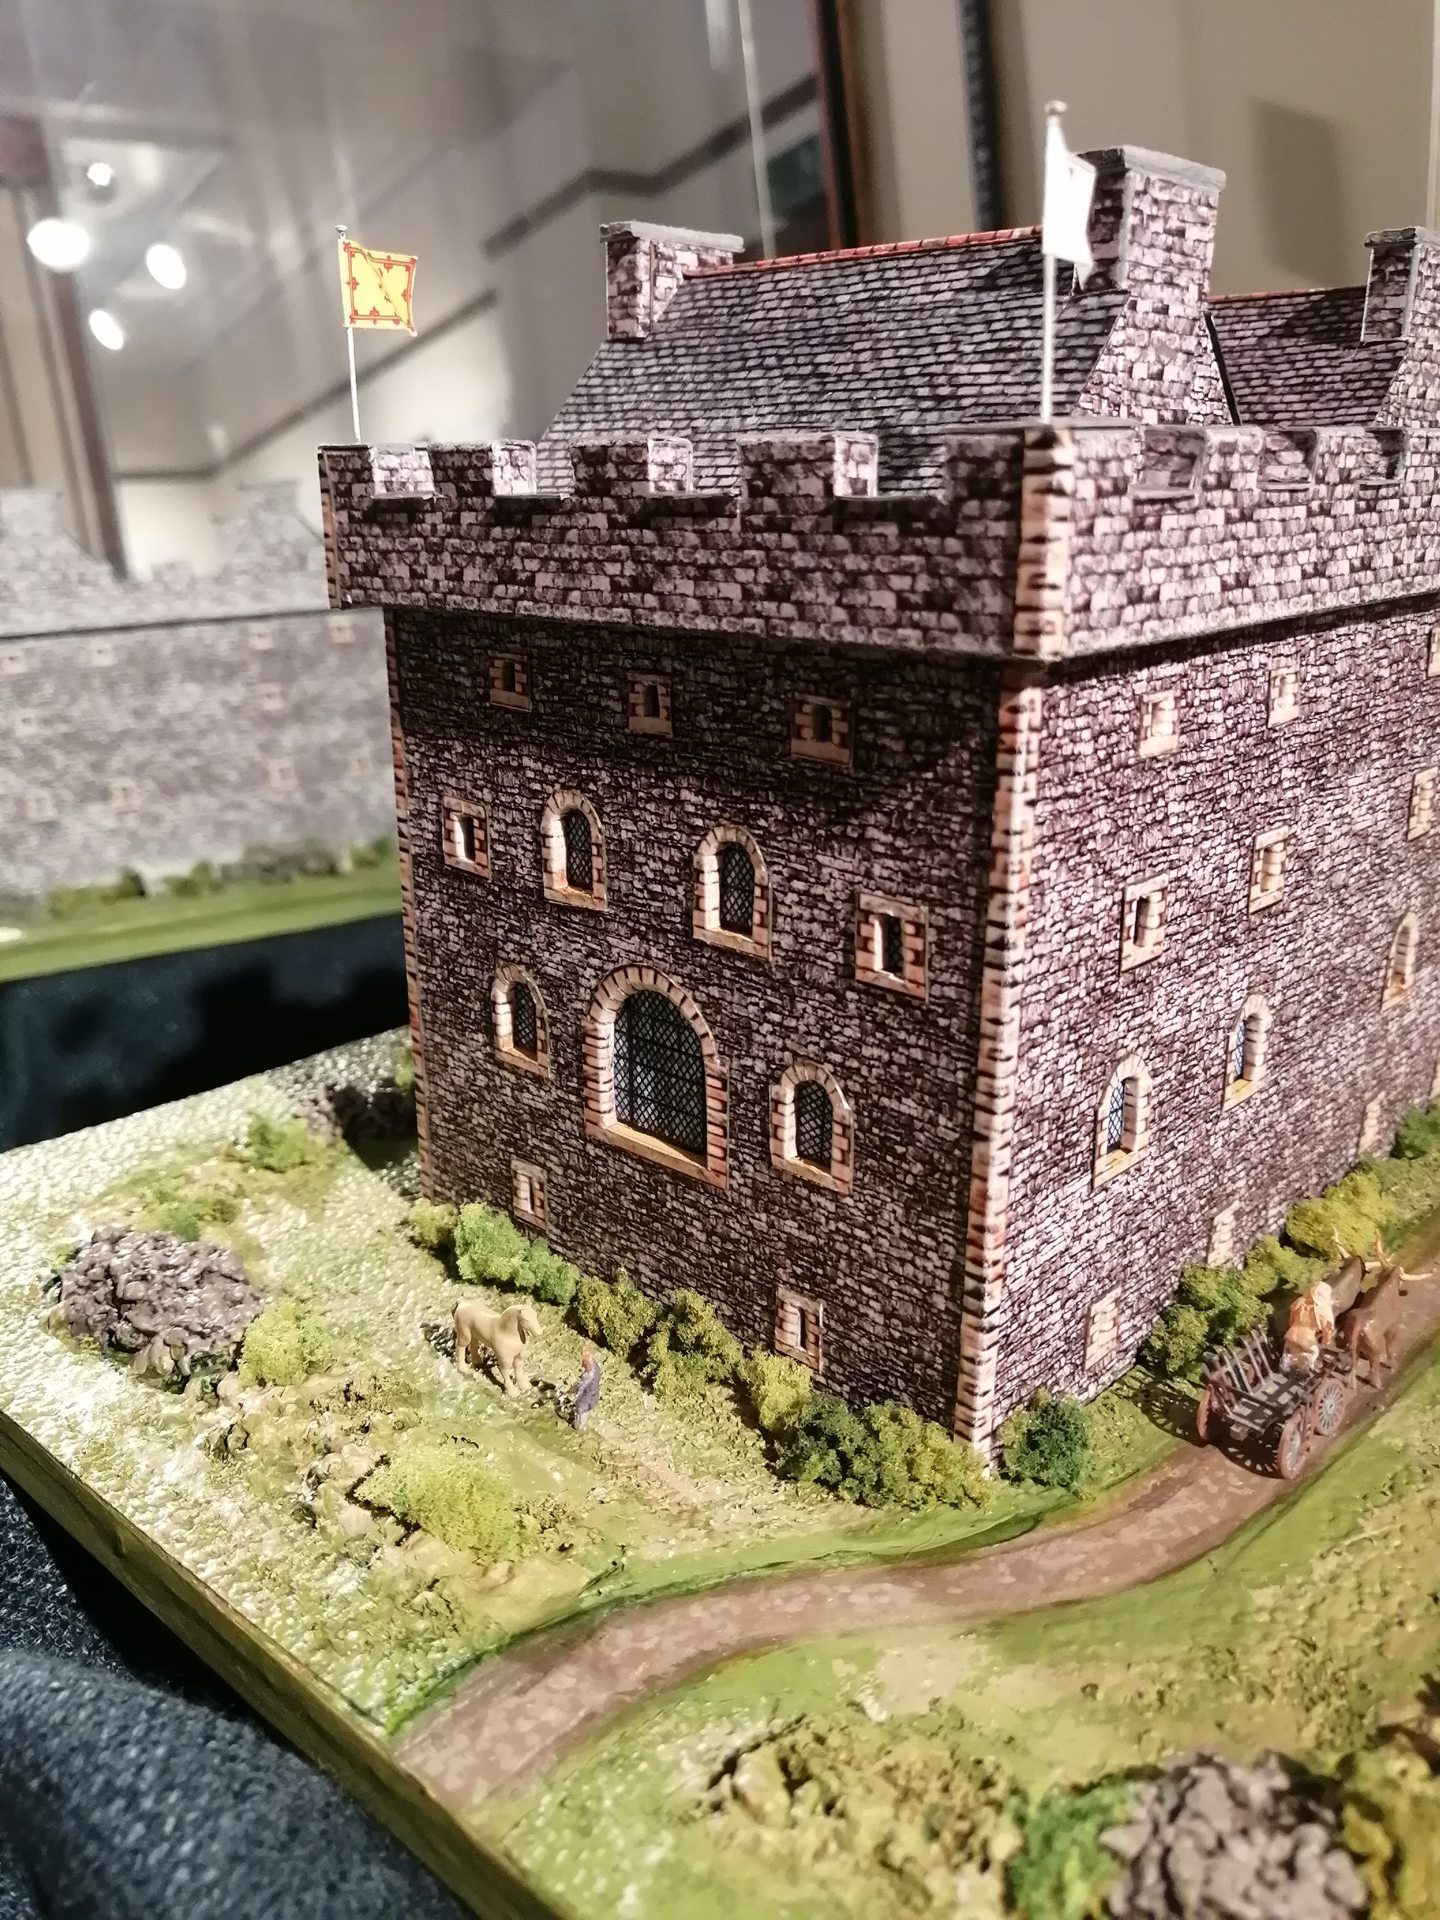 The model of Dunnideer Castle is on 1:150 scale